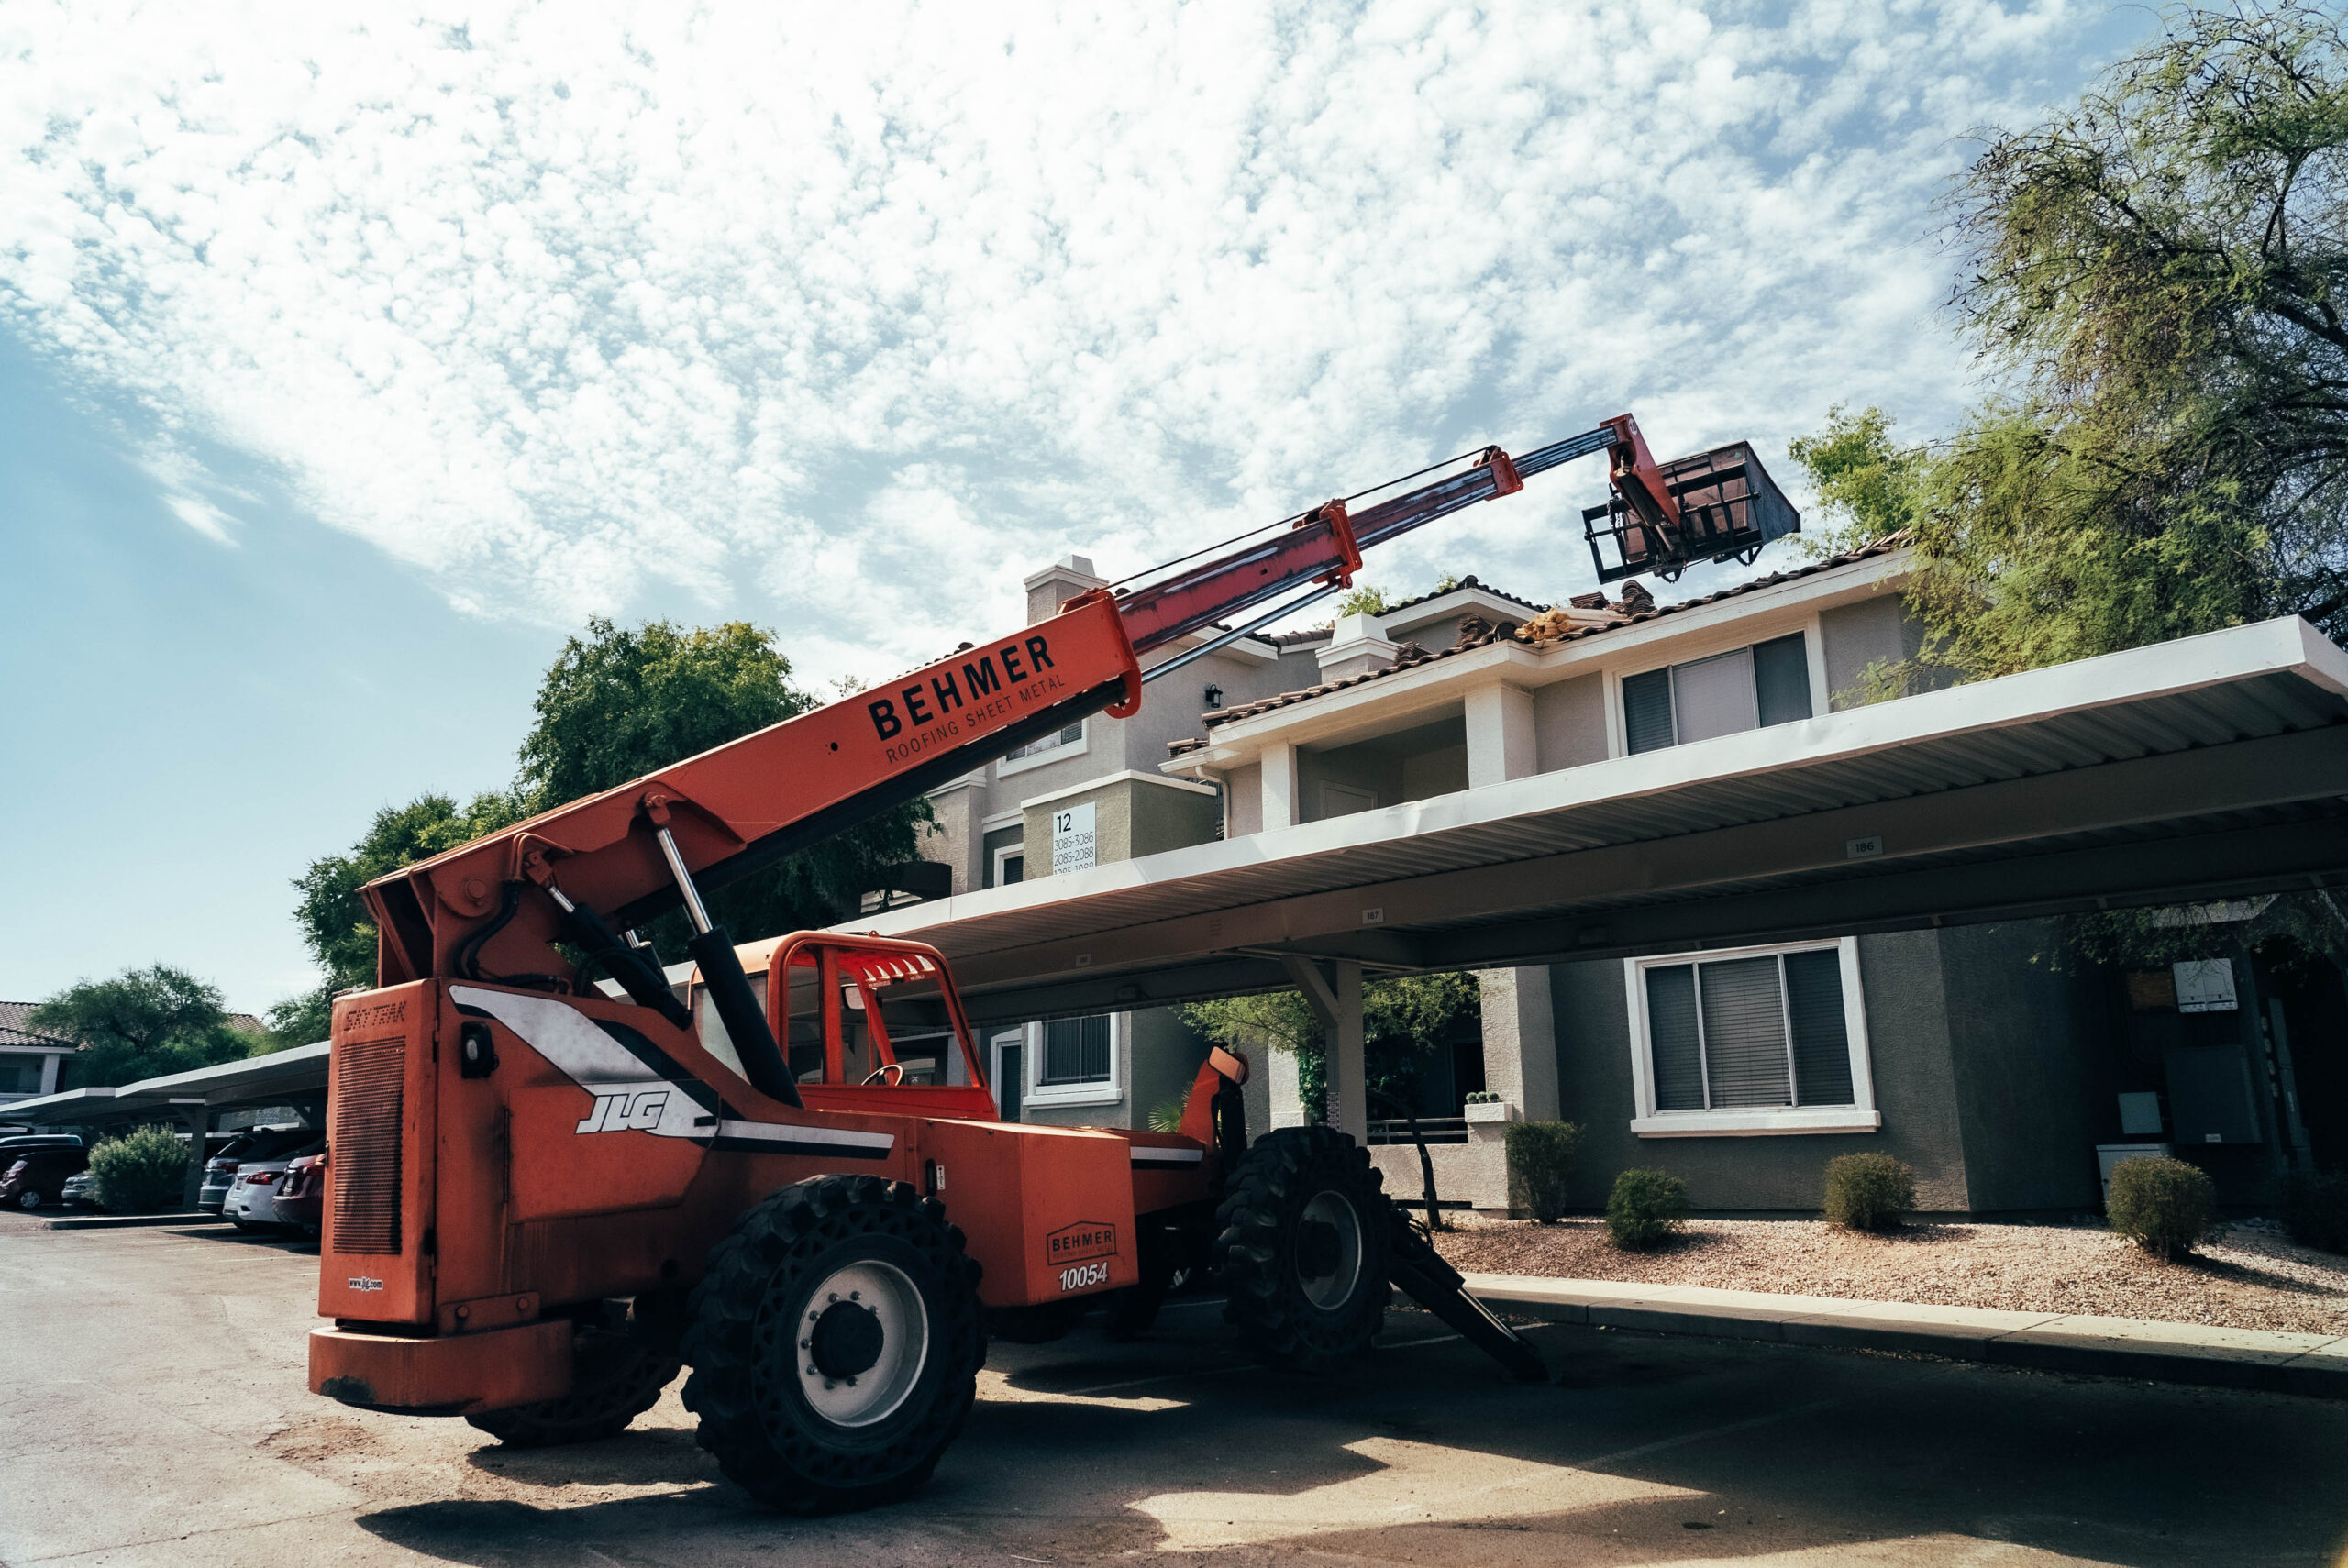 Orange crane at a Paradise Valley tile roof installation site.